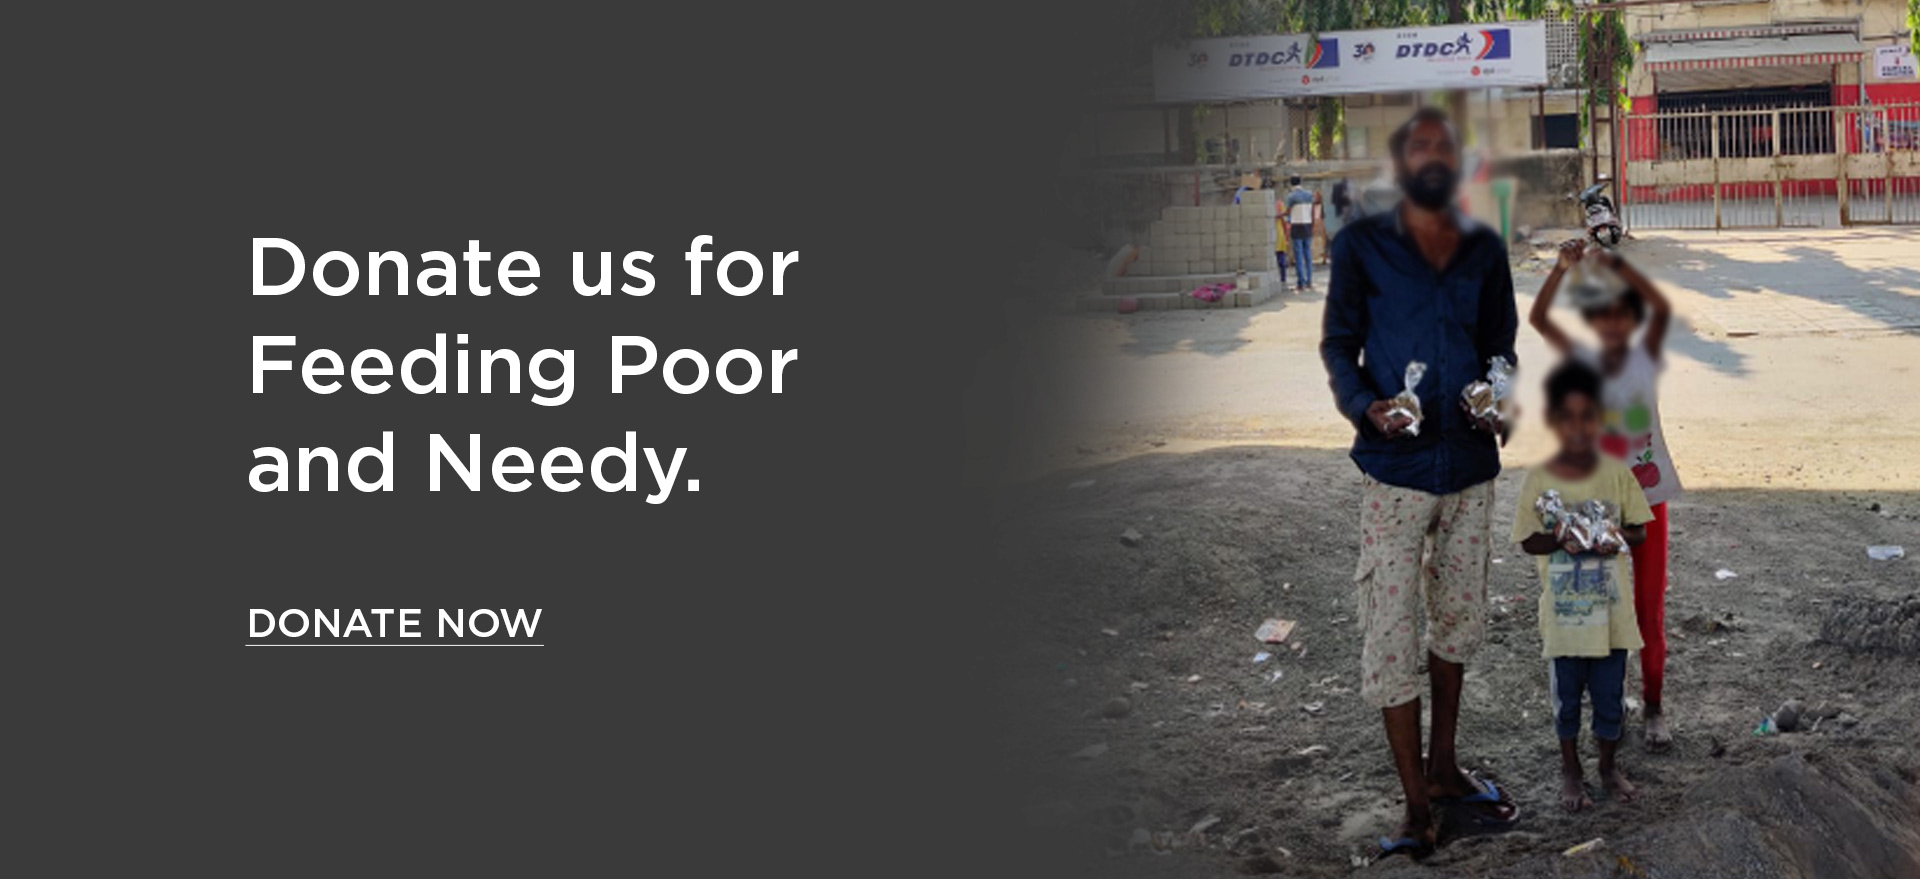 Donate us for Feeding Poor and Needy.